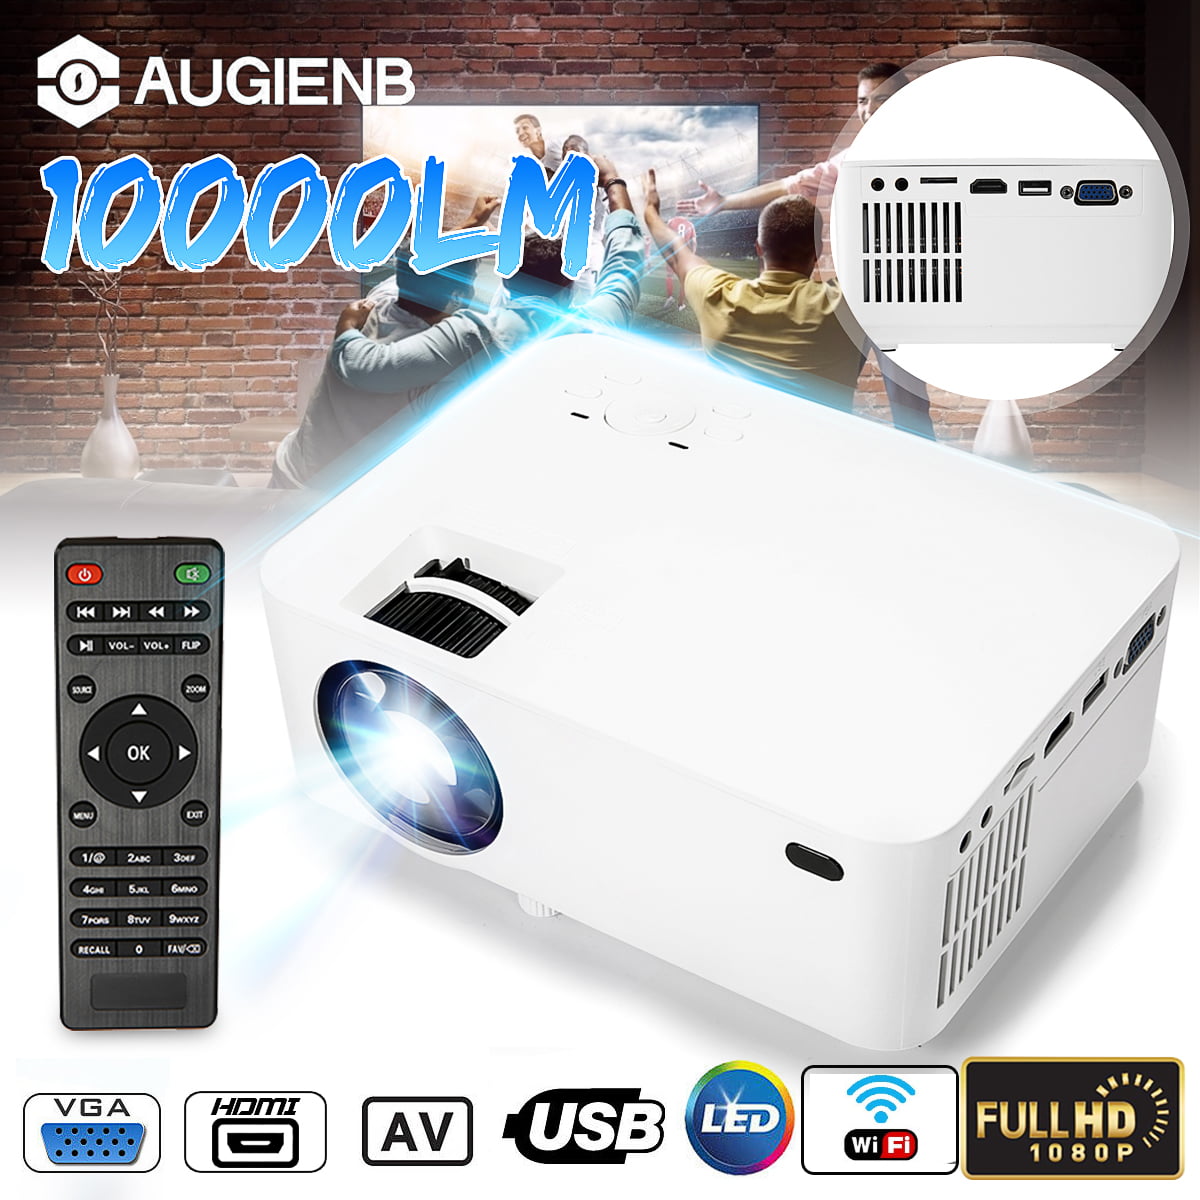 With Projector Wifi Projector Wireless Projector Supports 1080P Full HD 